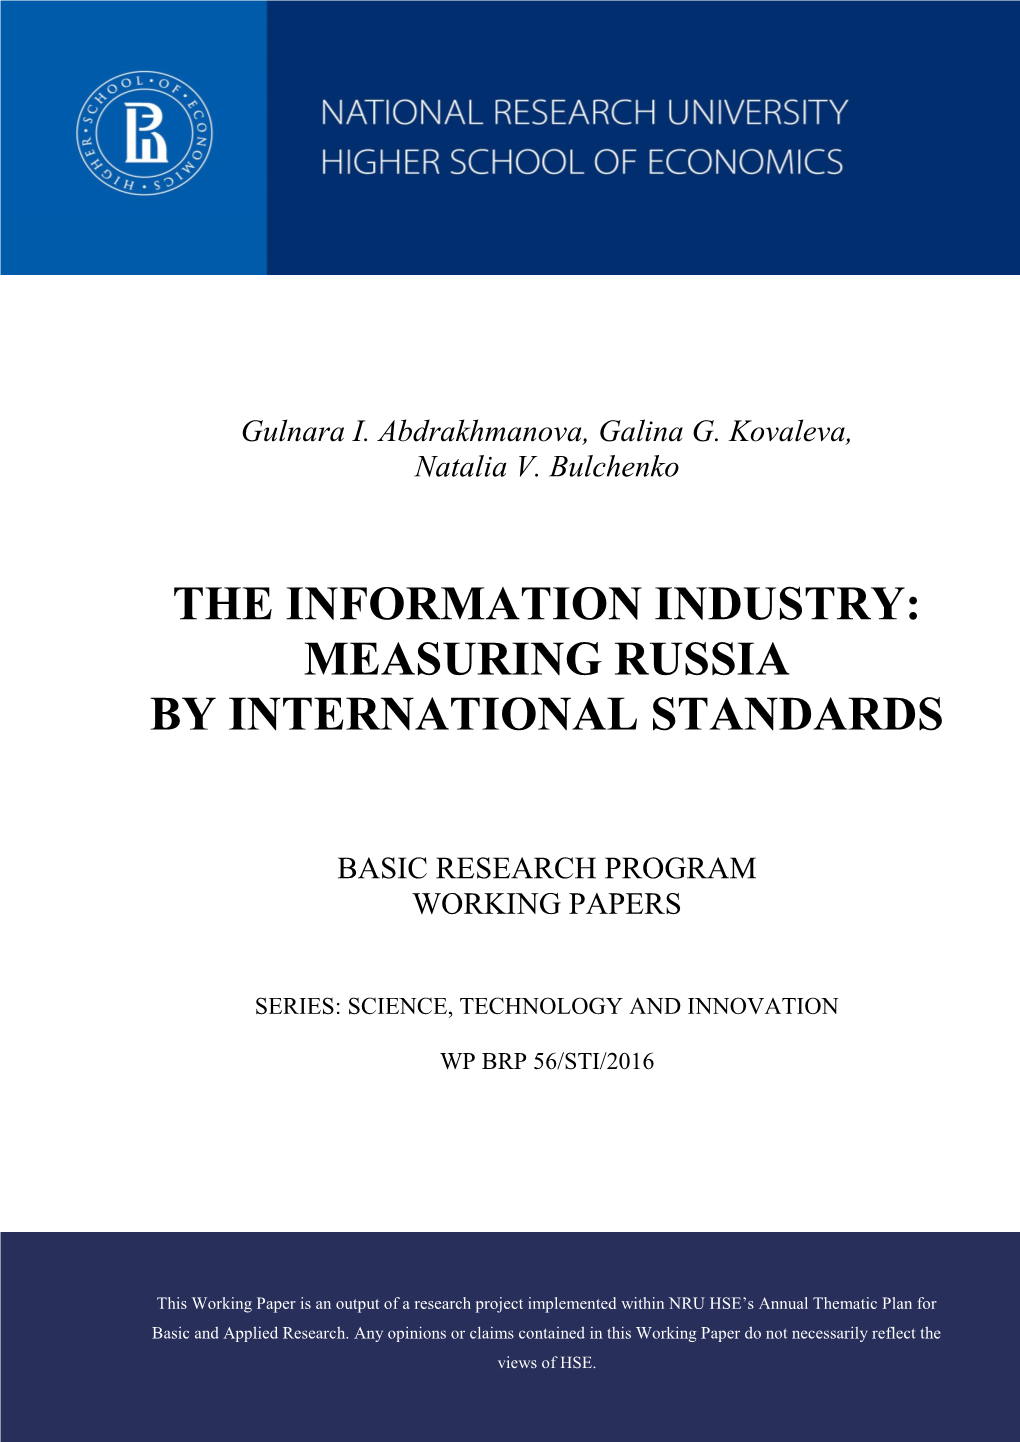 Measuring Russia by International Standards